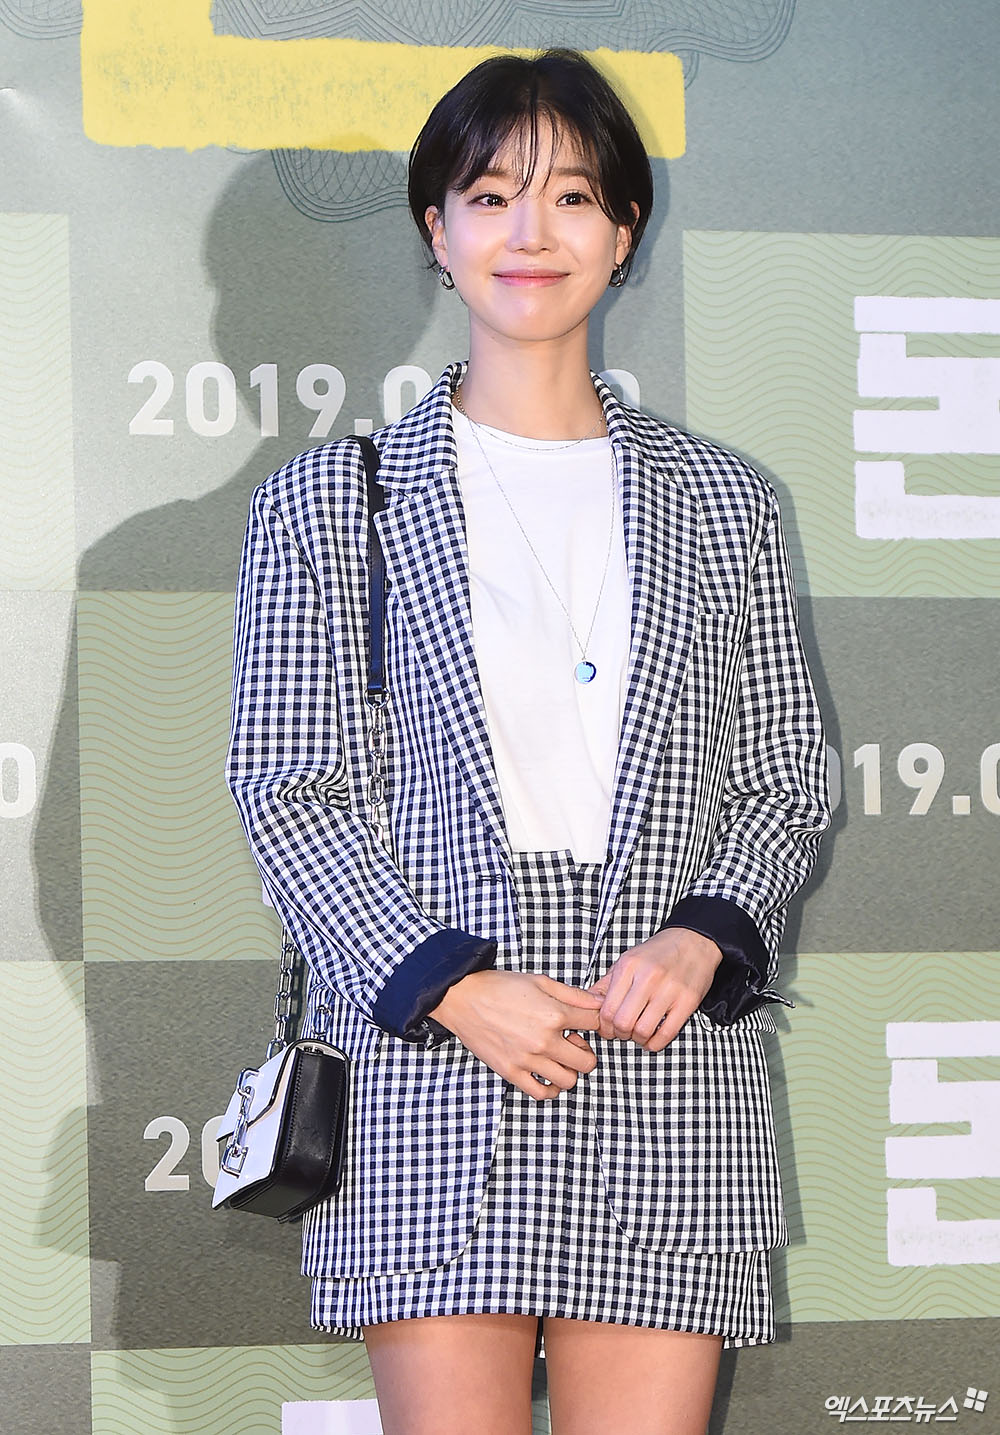 Actor Im Se-mi, who attended the VIP premiere of the movie Don held at Megabox COEX in Seoul, Seoul on the afternoon of the 18th, is posing.